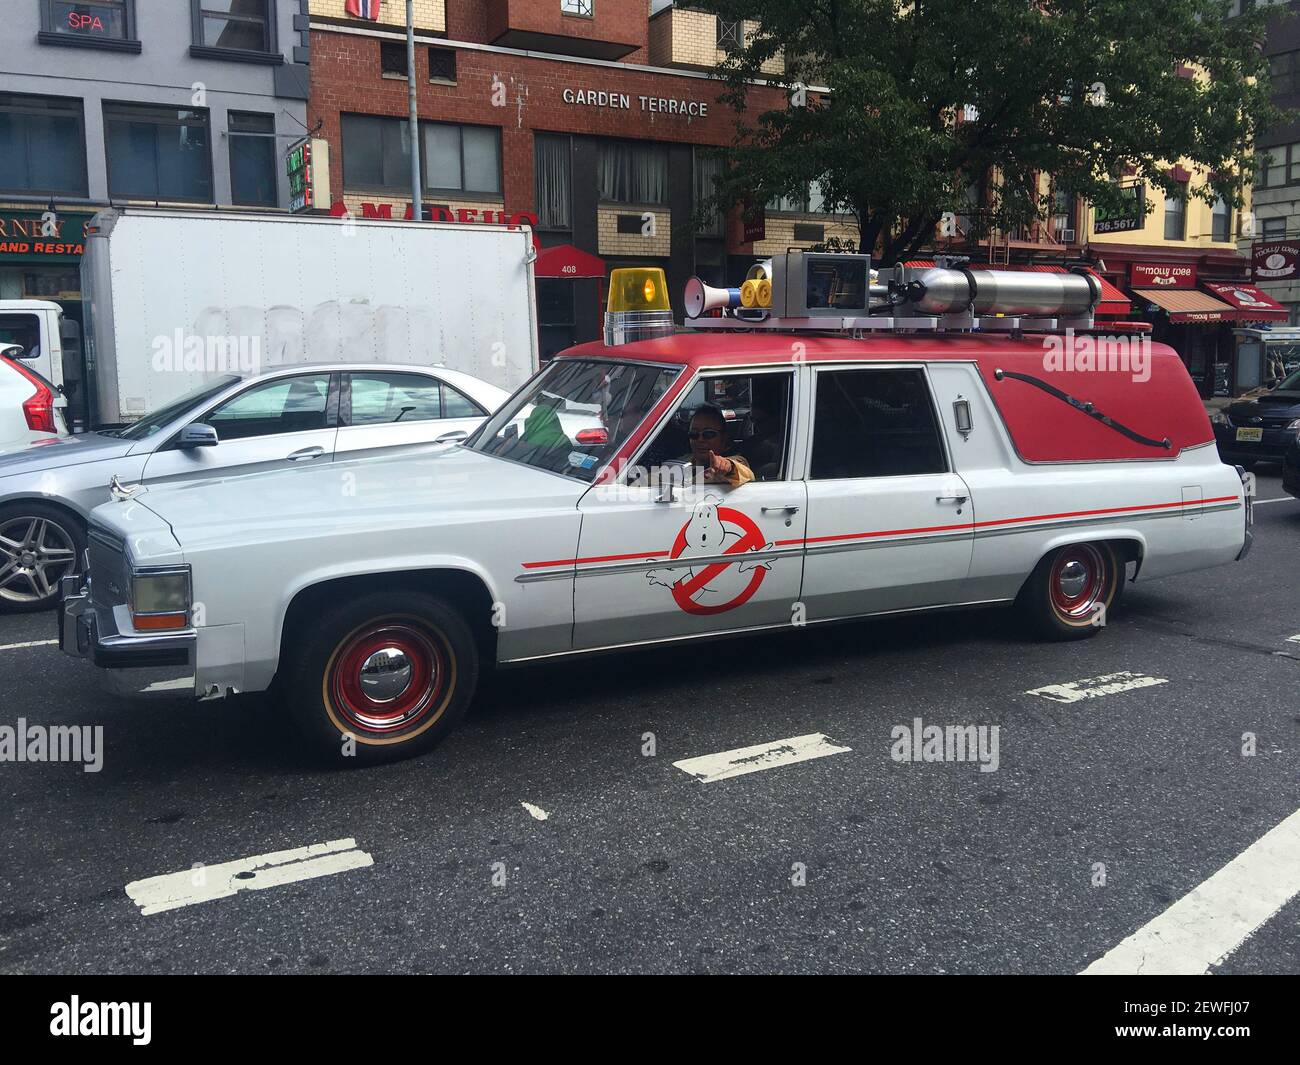 Atmosphere at Ghostbuster Ecto-1 Car Sighting in Manhattan - Promotion of new Ghostbusters Movie  on July 15, 2016 in New York City, USA. (Photo by Steve Eichner) Stock Photo